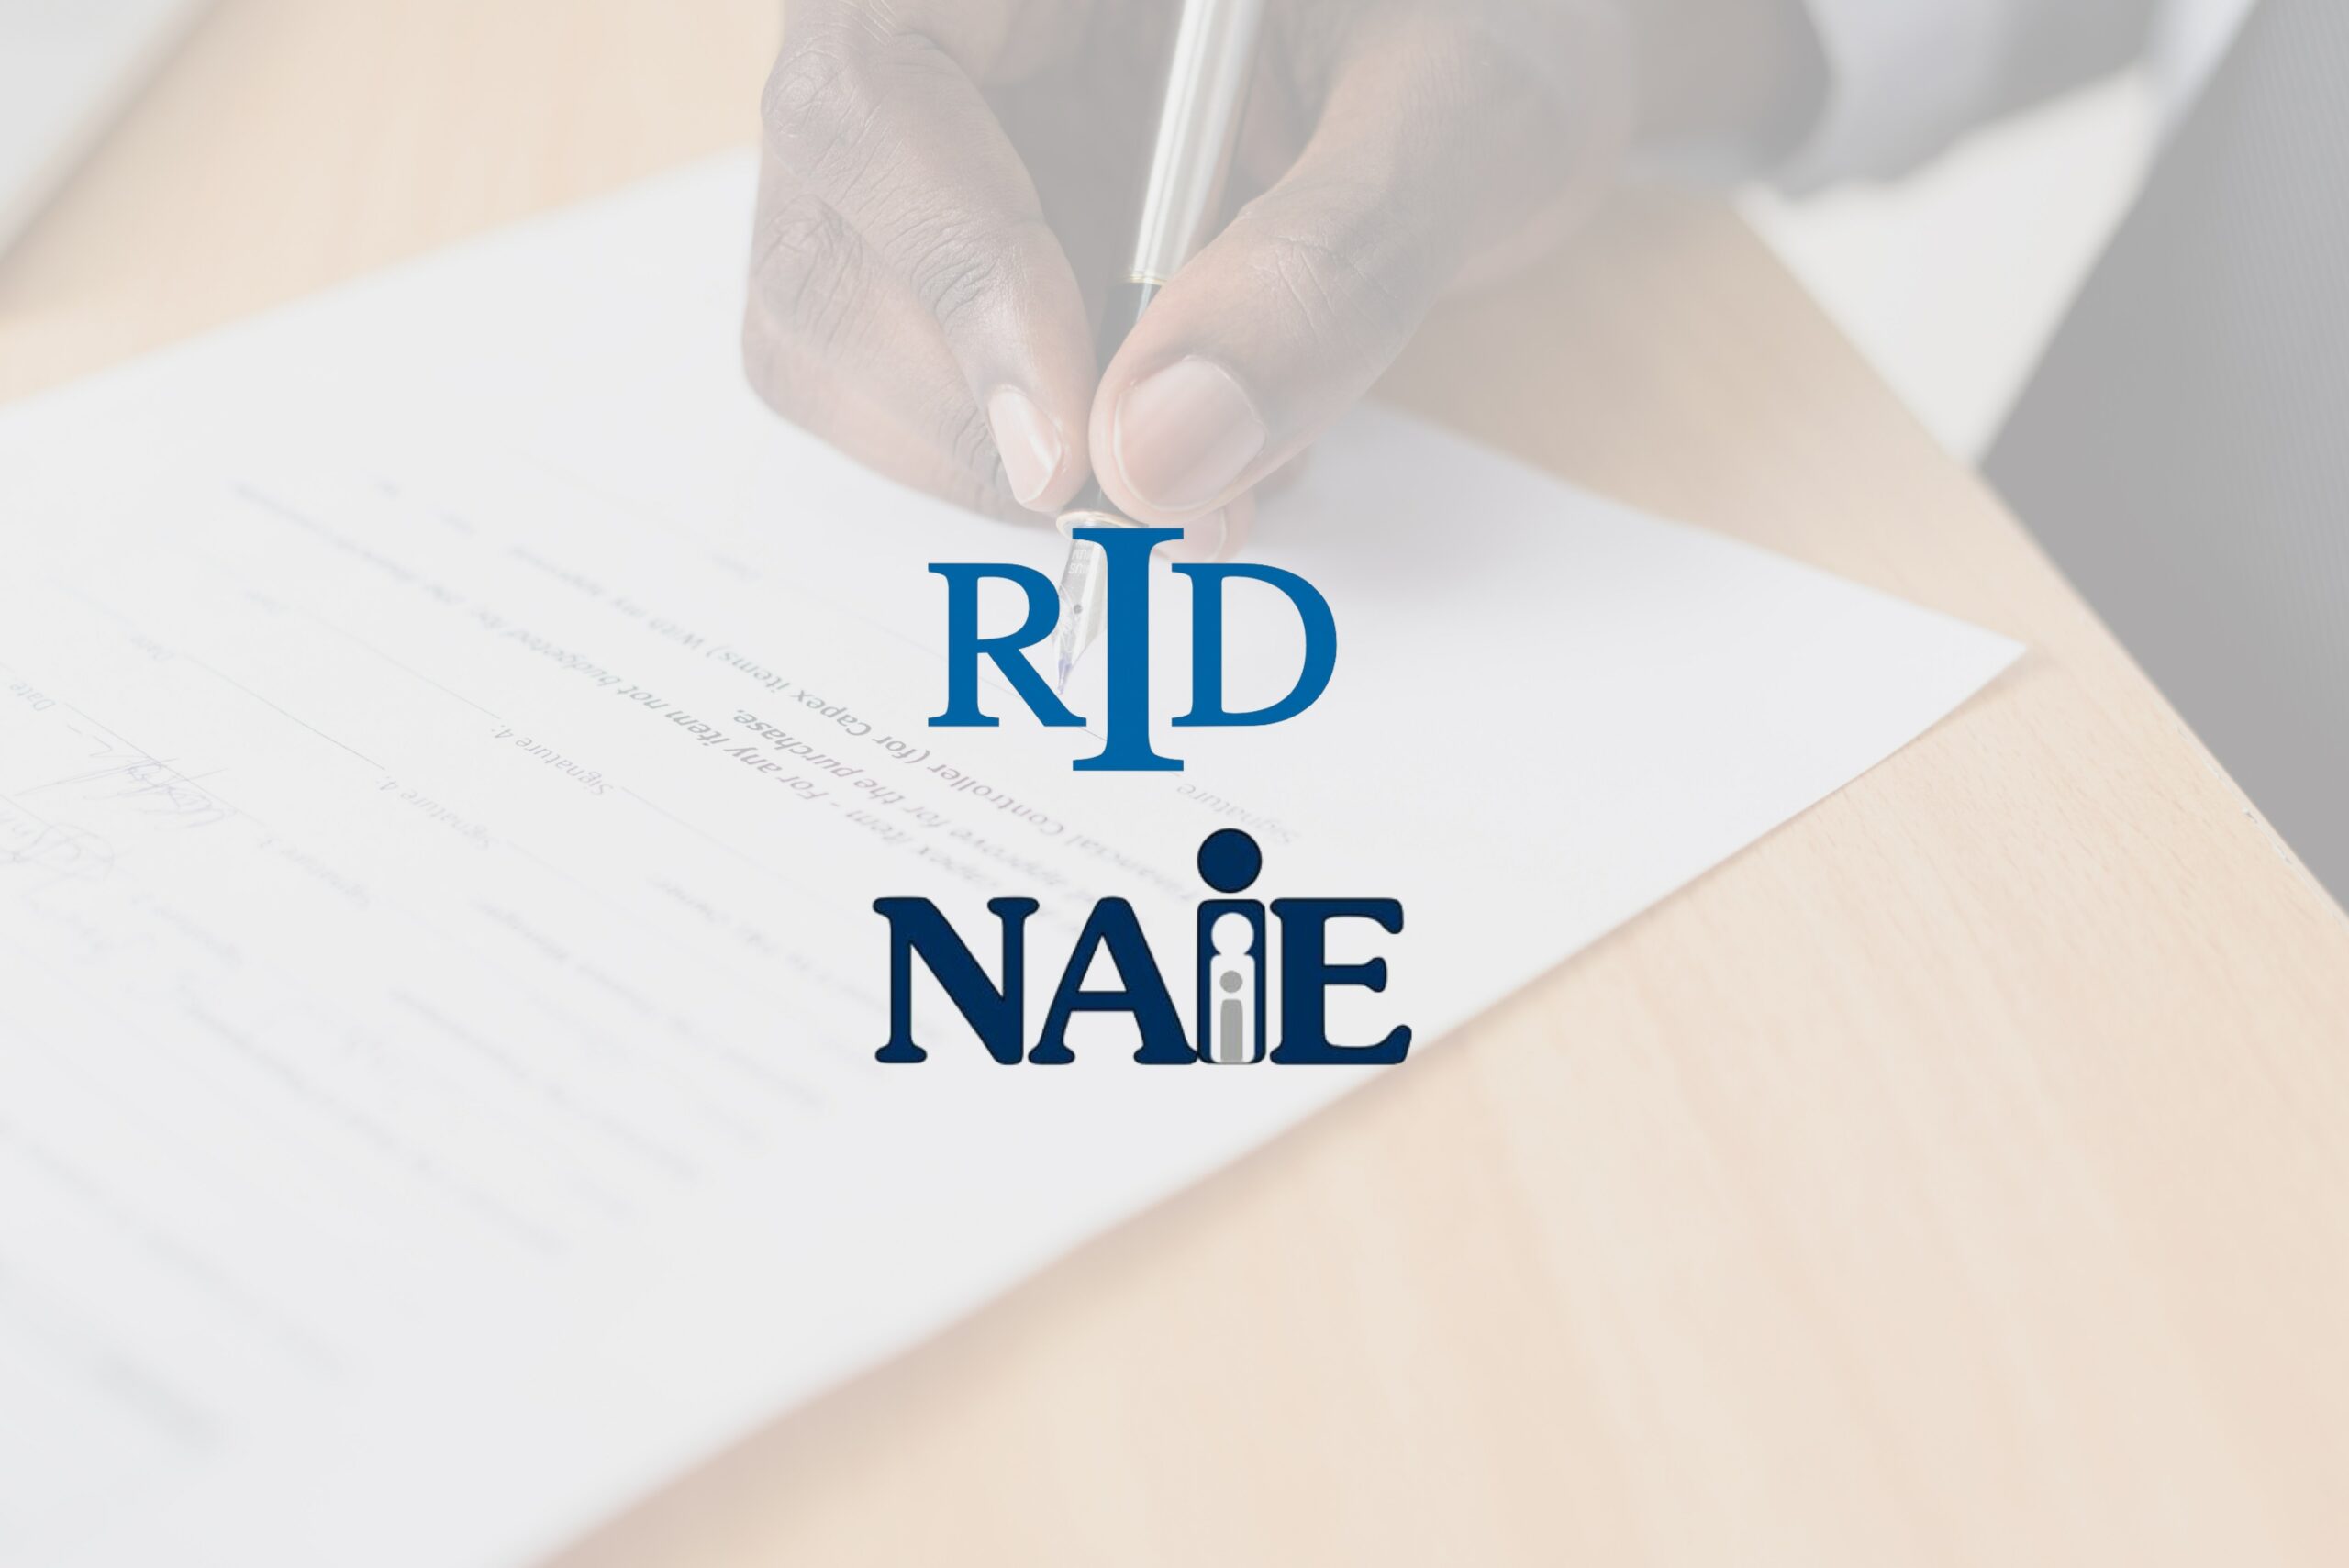 RID NAIE Joint Position Statement